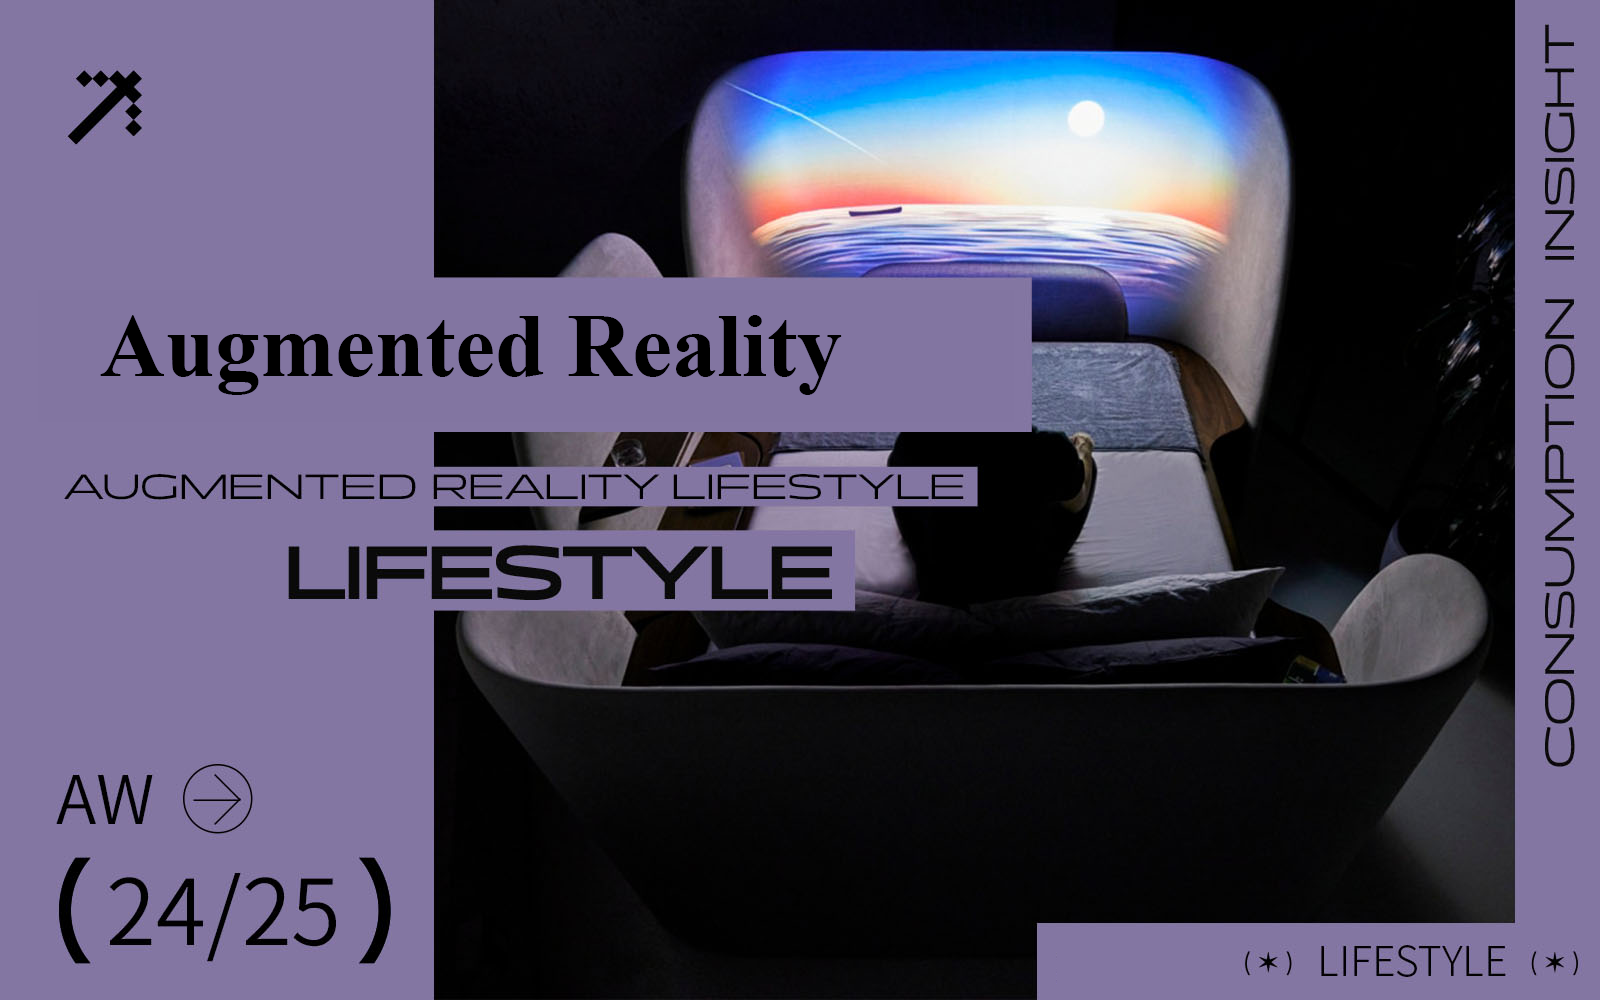 Augmented Reality -- A/W 24/25 Lifestyle Prediction